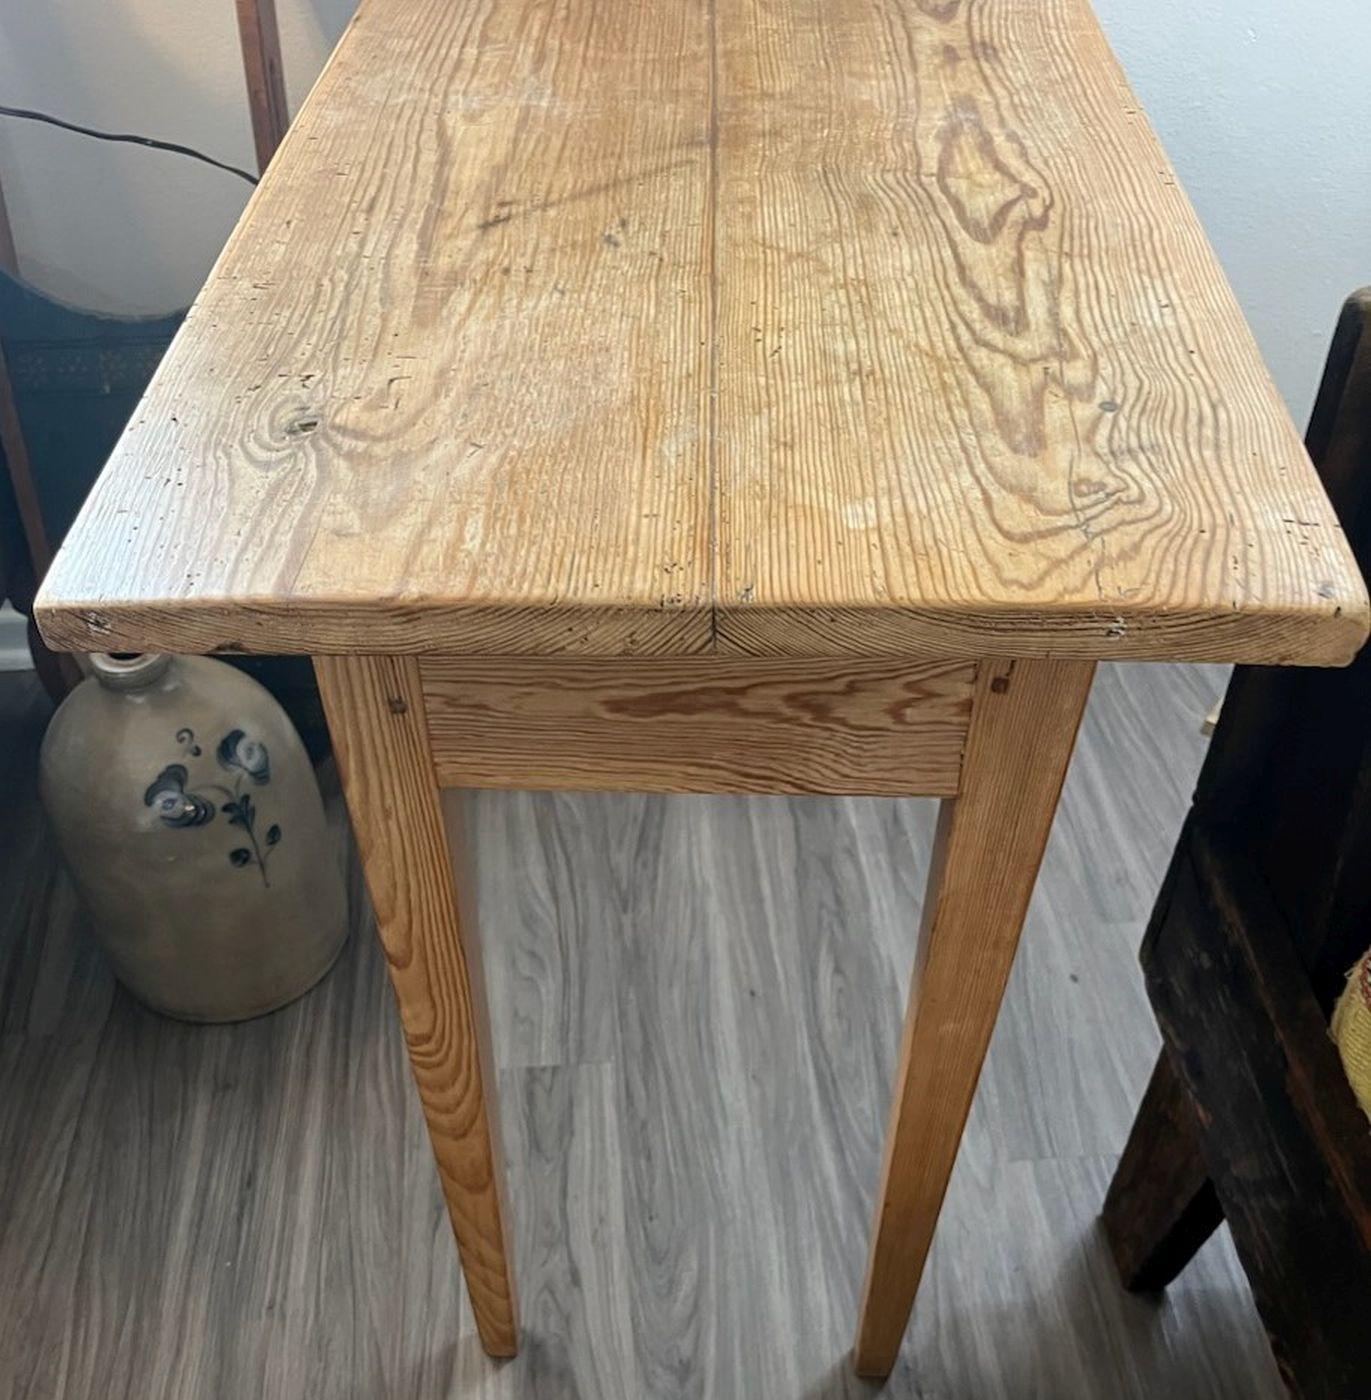 19th C Pine side table with one drawer. Makes a great end table next to a sofa or bed. The condition is very good and sturdy.